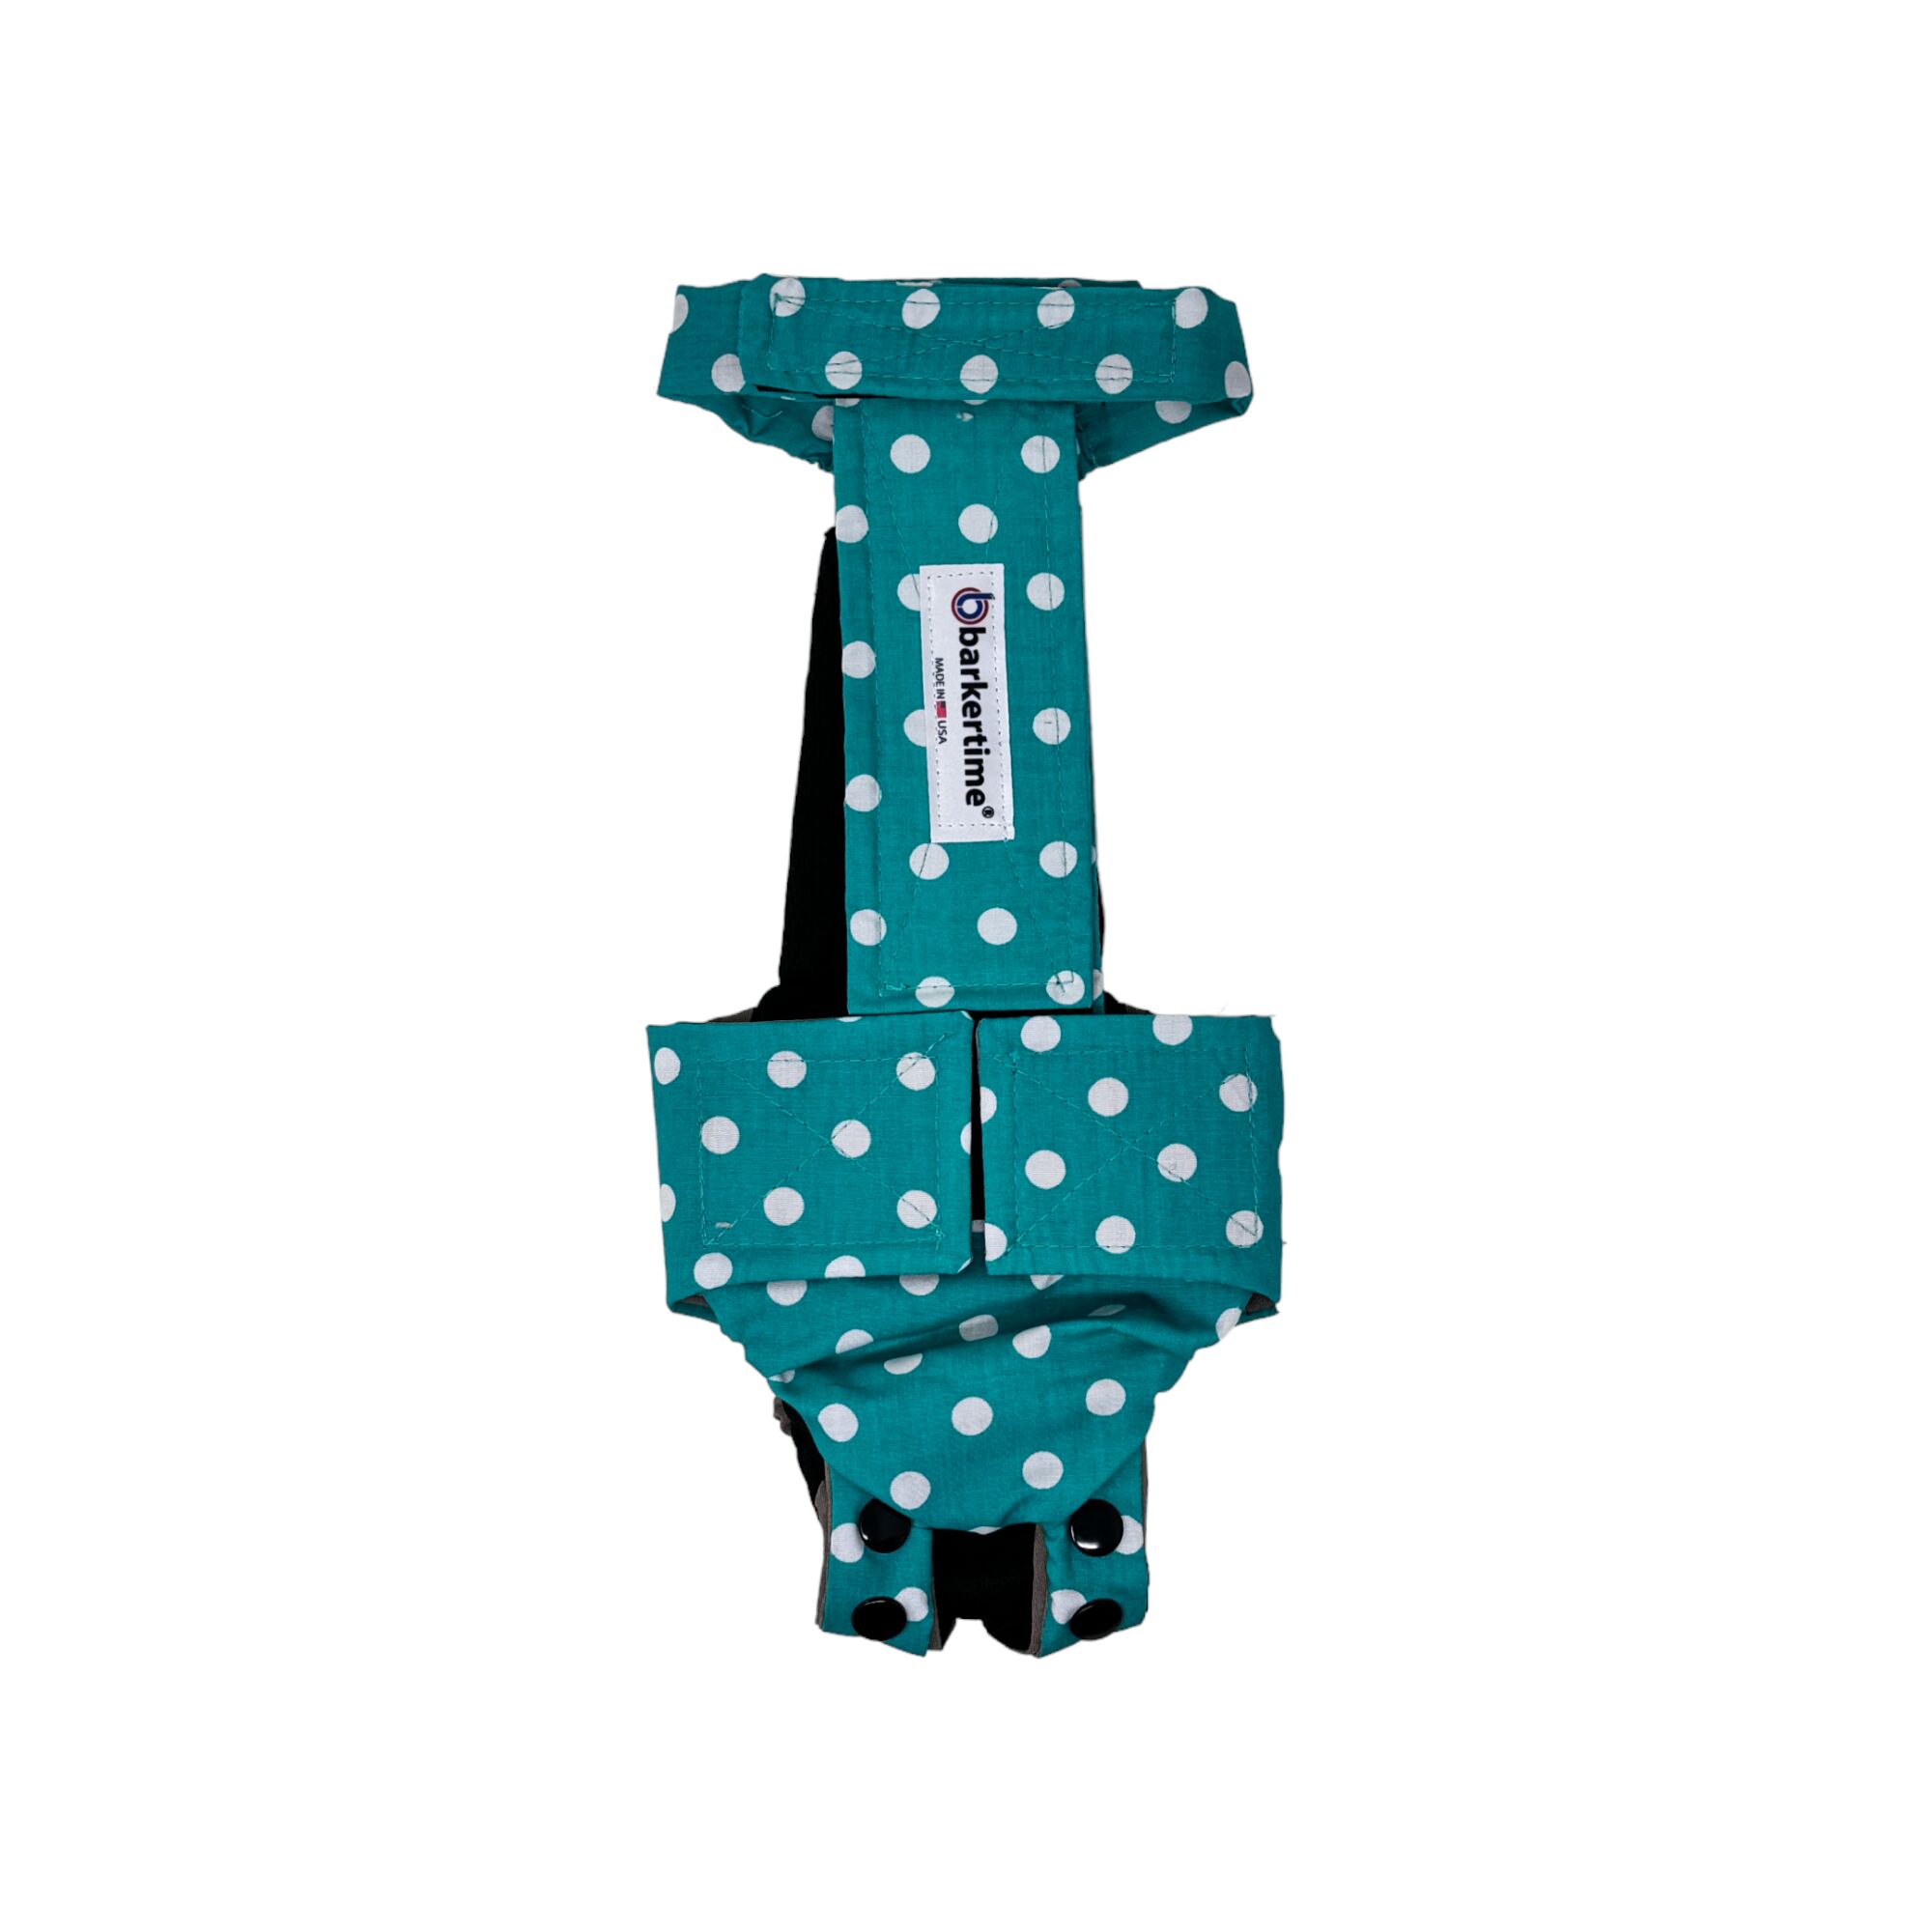 Turquoise Polka Dot Dog Diaper Snappy Overall